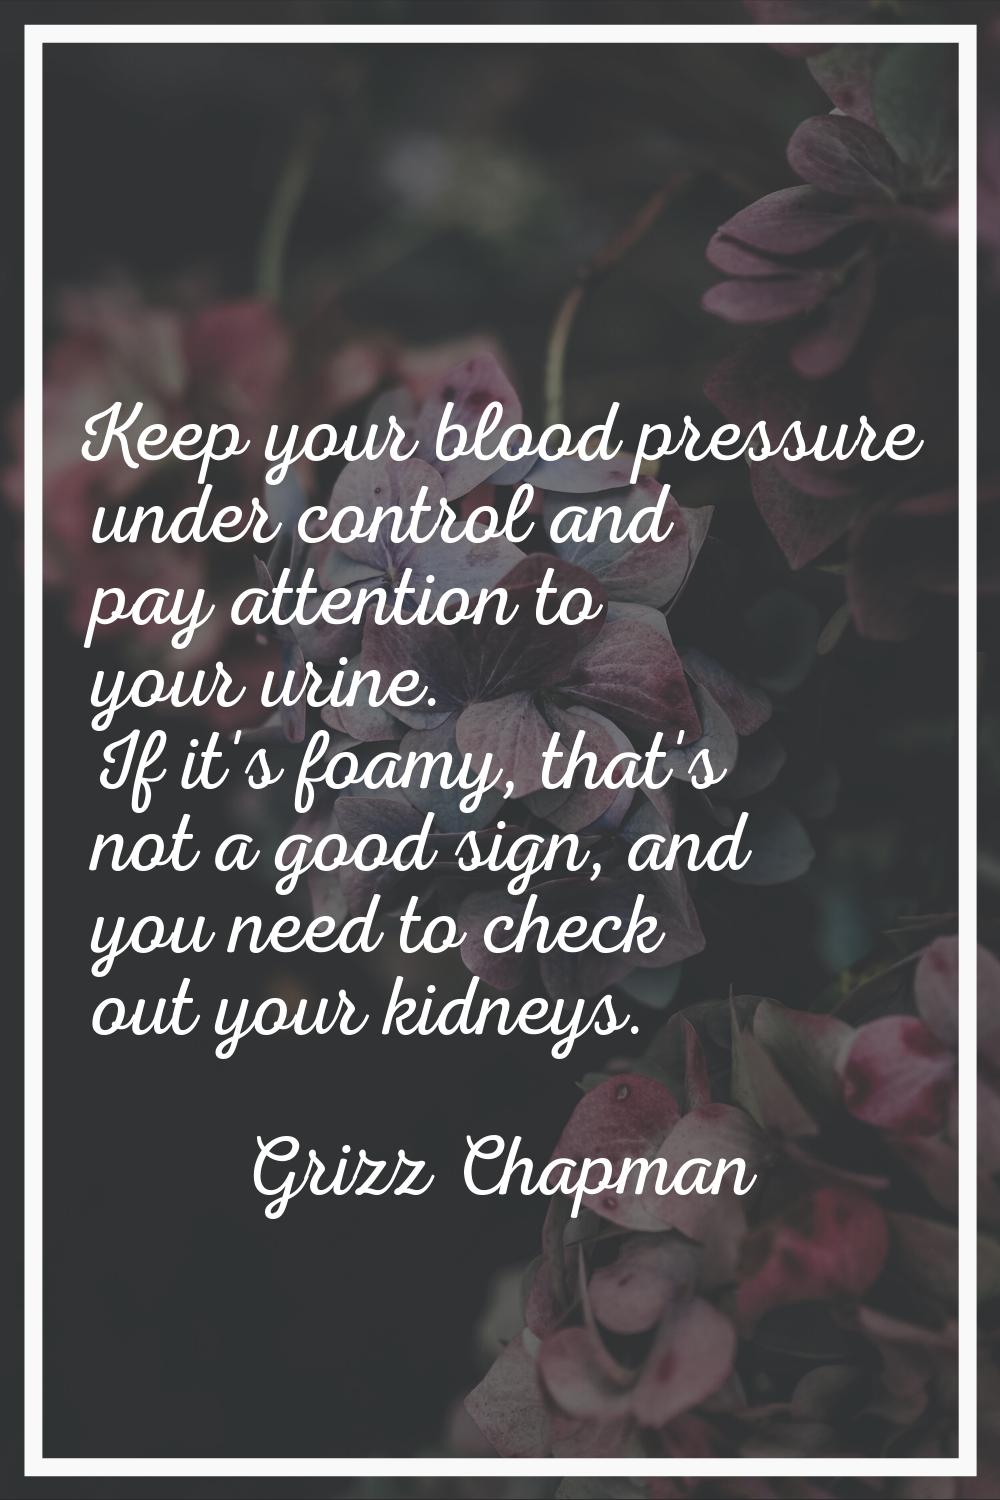 Keep your blood pressure under control and pay attention to your urine. If it's foamy, that's not a